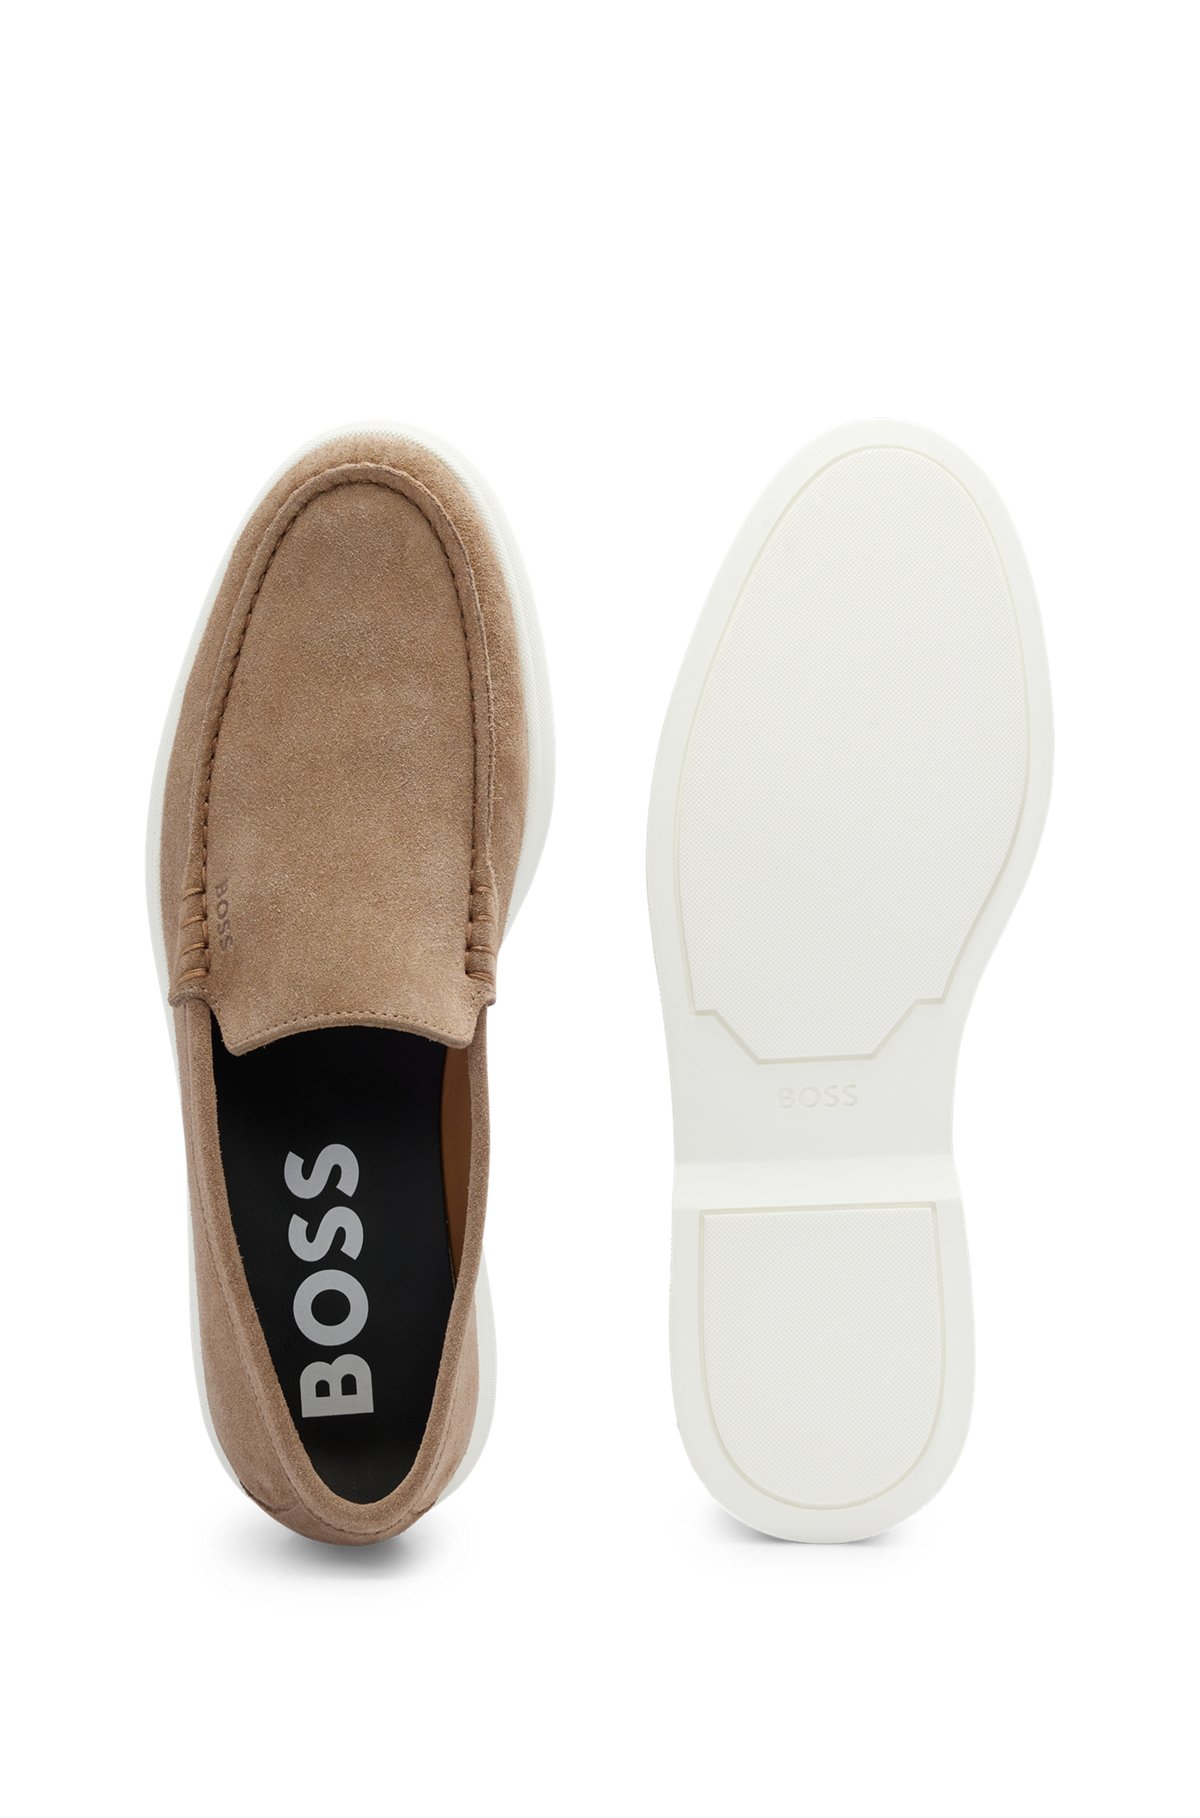 ihærdige Triumferende Fellow BOSS - Suede loafers with embossed logo and TPU outsole